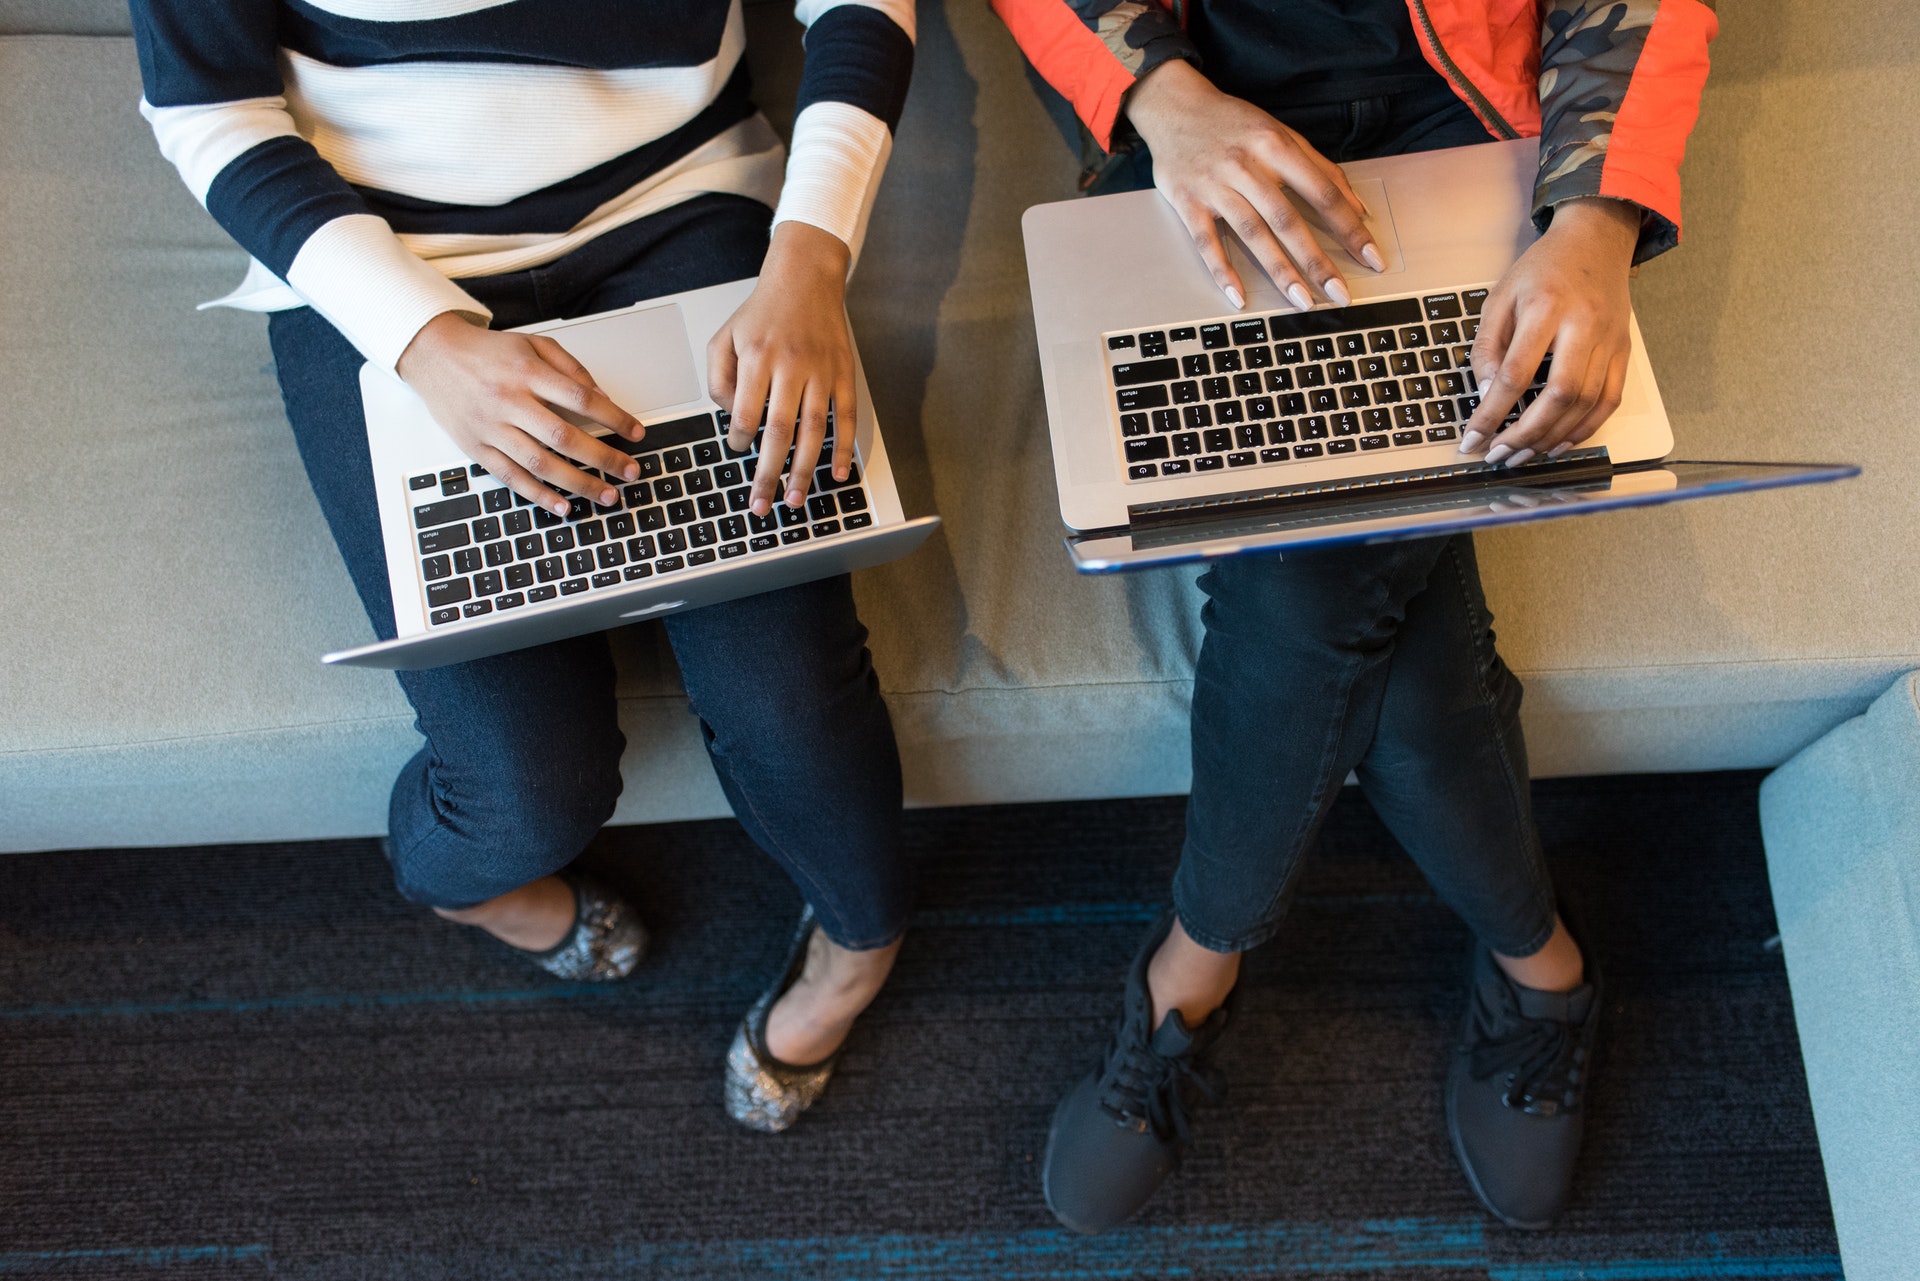 Two women sit side by side and work on their laptops